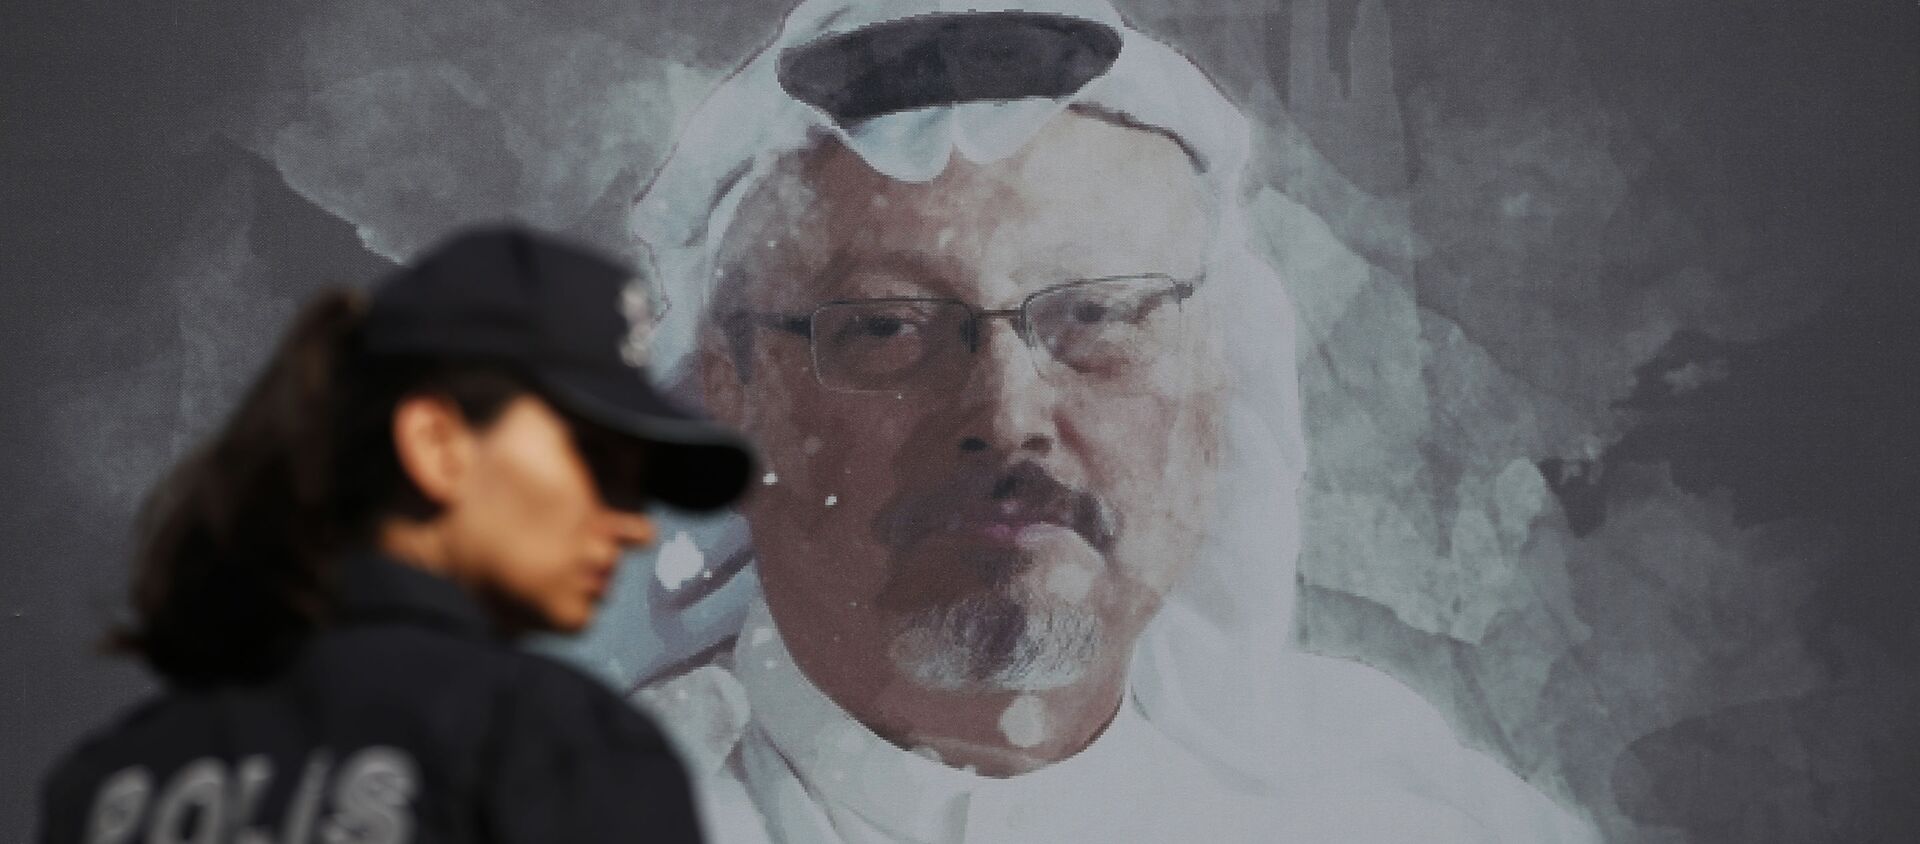 In this Wednesday, Oct. 2, 2019 file photo, a Turkish police officer walks past a picture of slain Saudi journalist Jamal Khashoggi prior to a ceremony, near the Saudi Arabia consulate in Istanbul, marking the one-year anniversary of his death. - Sputnik International, 1920, 03.08.2021